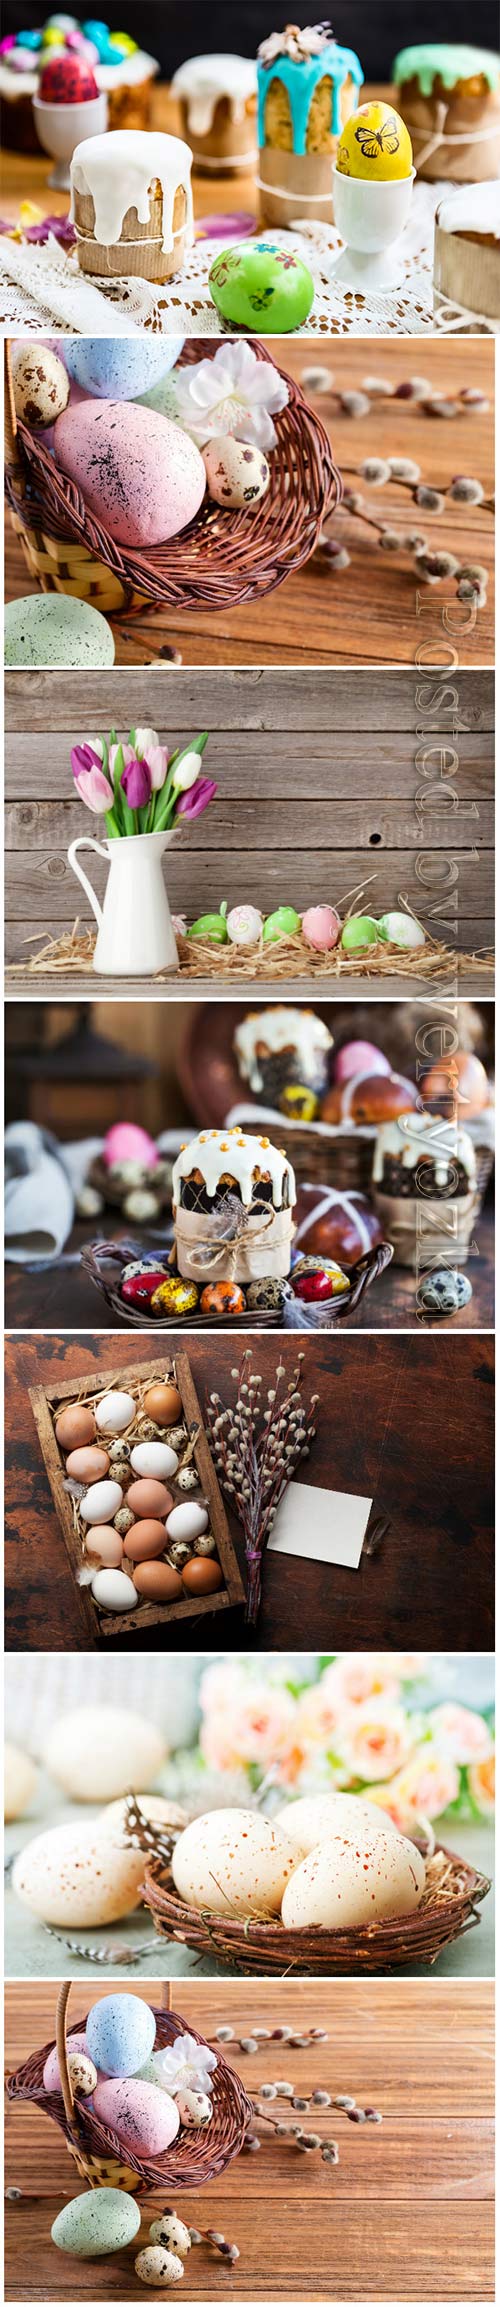 Happy Easter stock photo, Easter eggs, spring flowers # 9